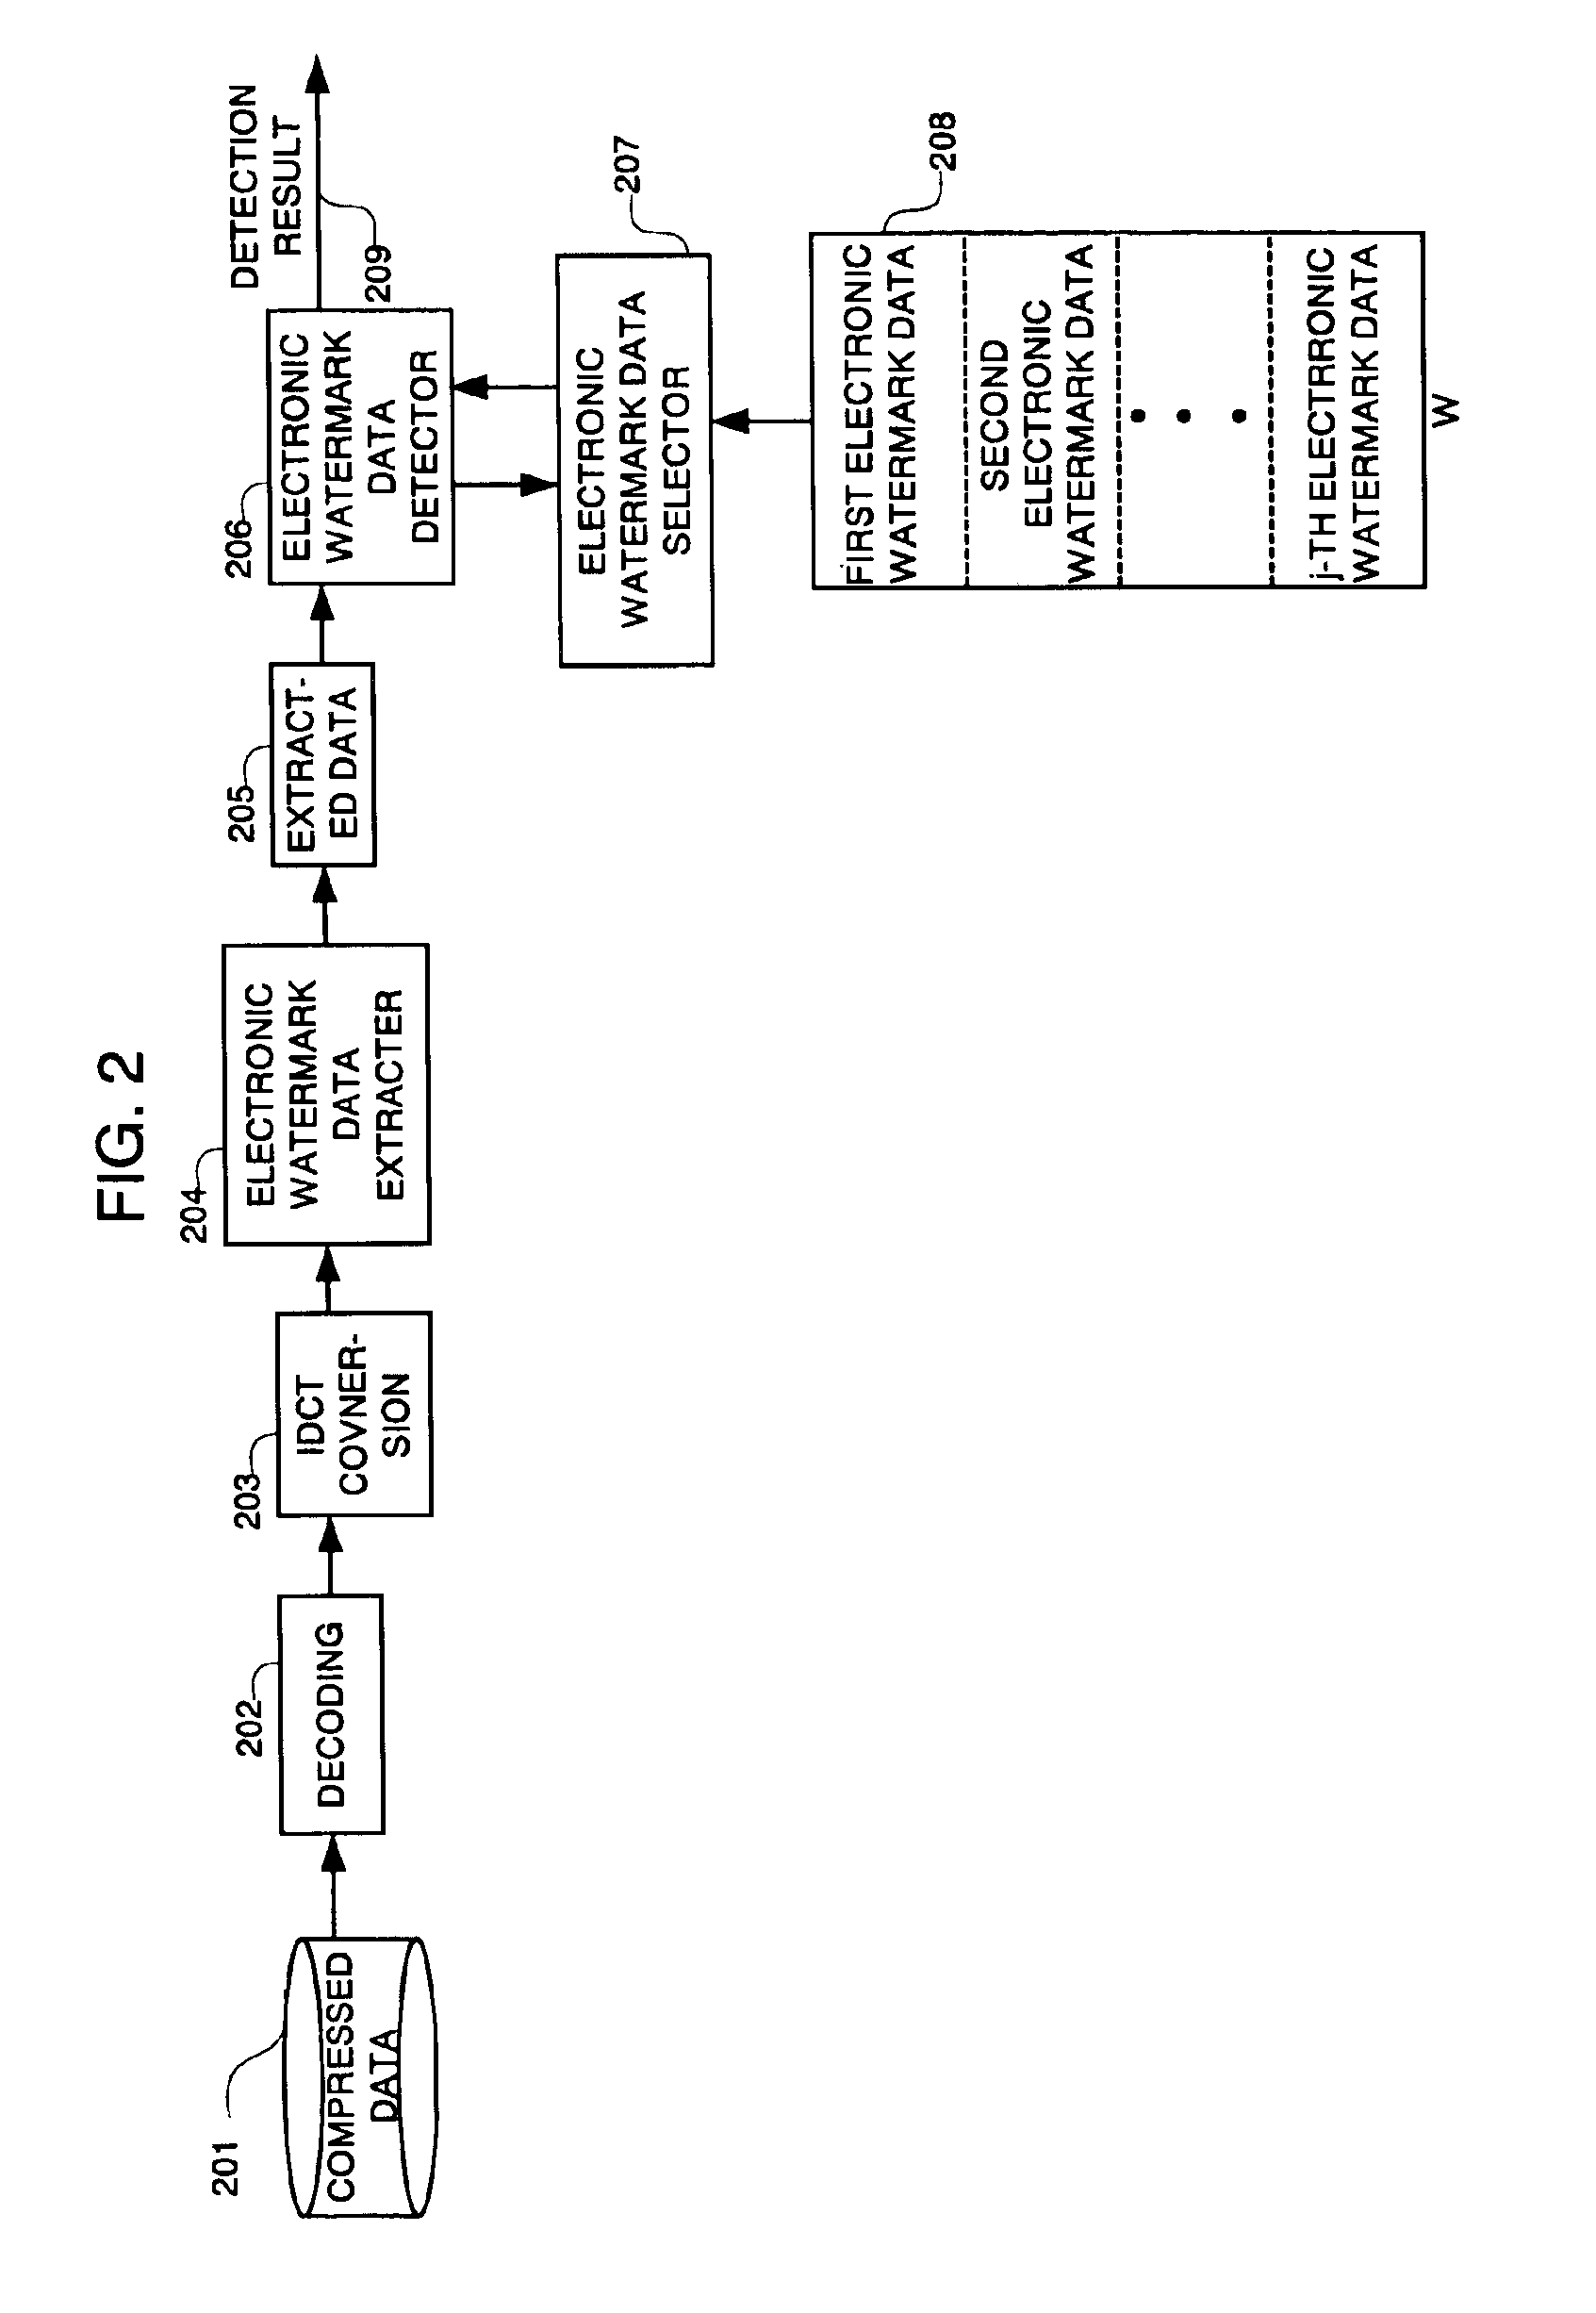 System and apparatus for inserting electronic watermark data